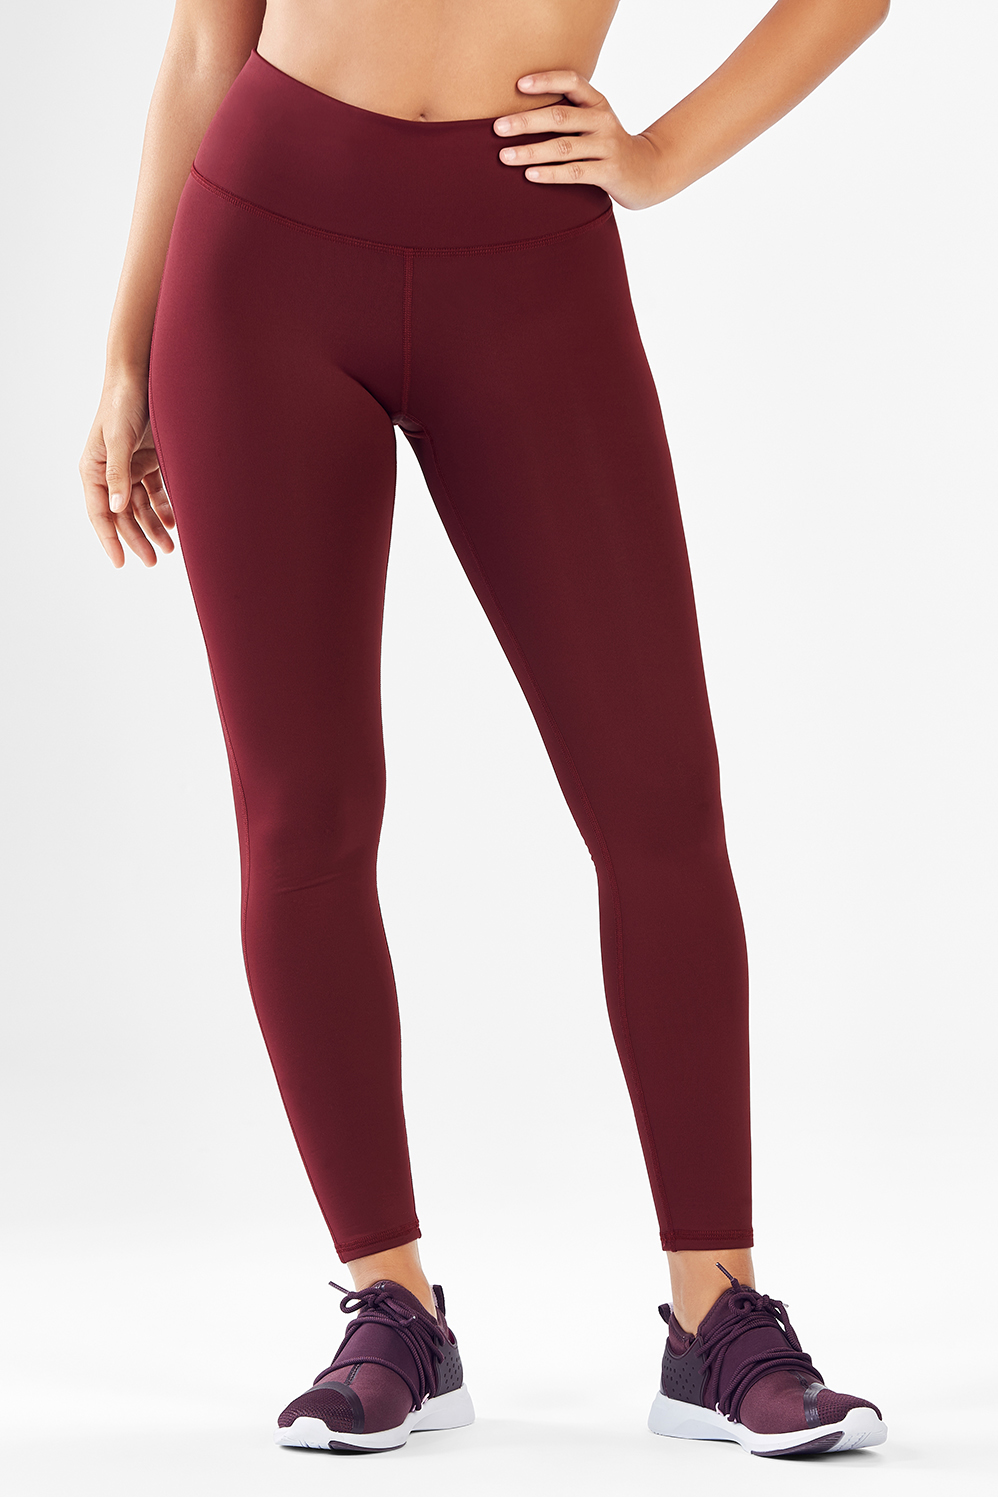 cold weather leggings sale